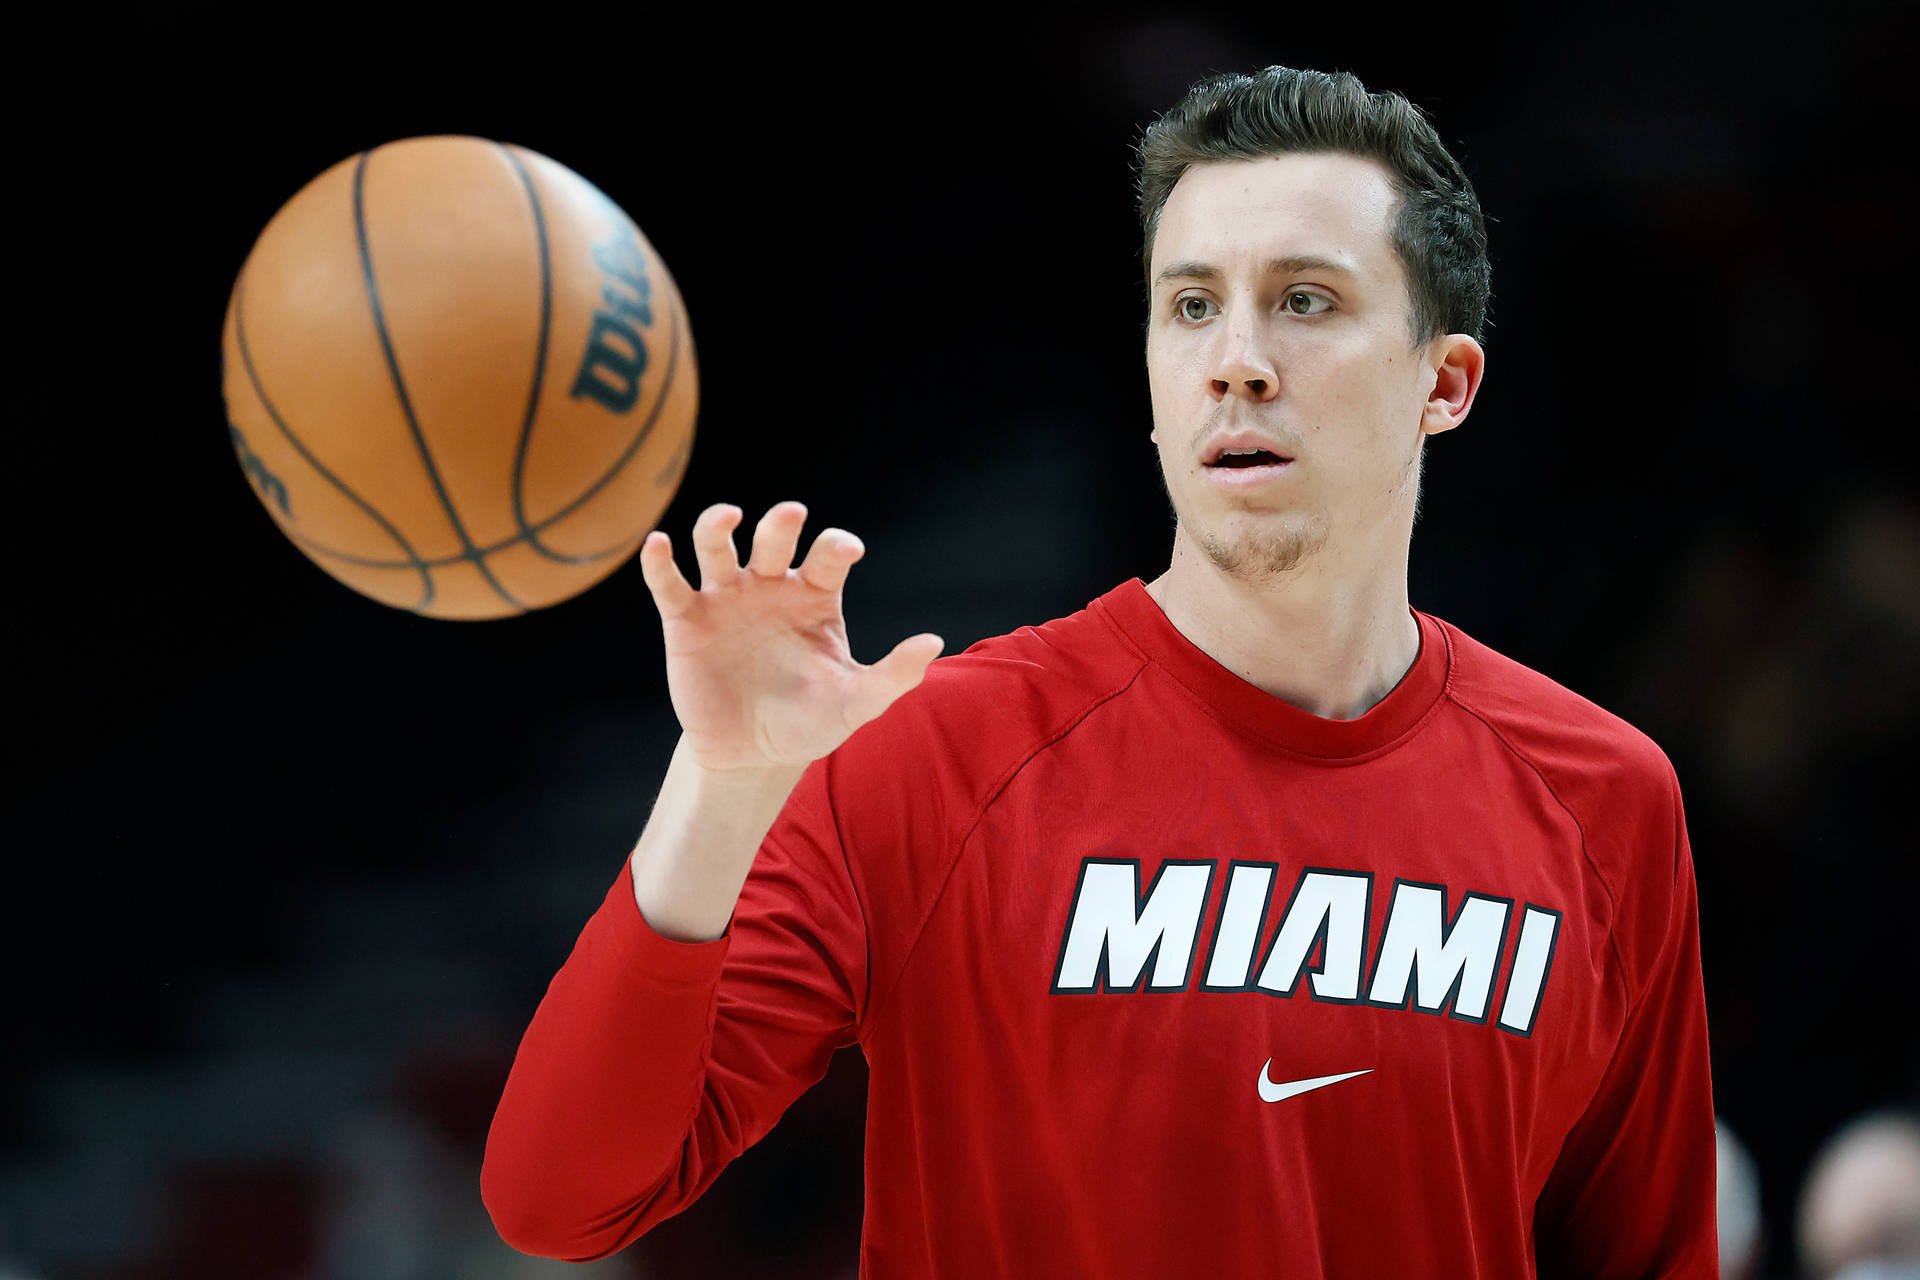 Duncan Robinson In Sleeve Miami Jersey Background